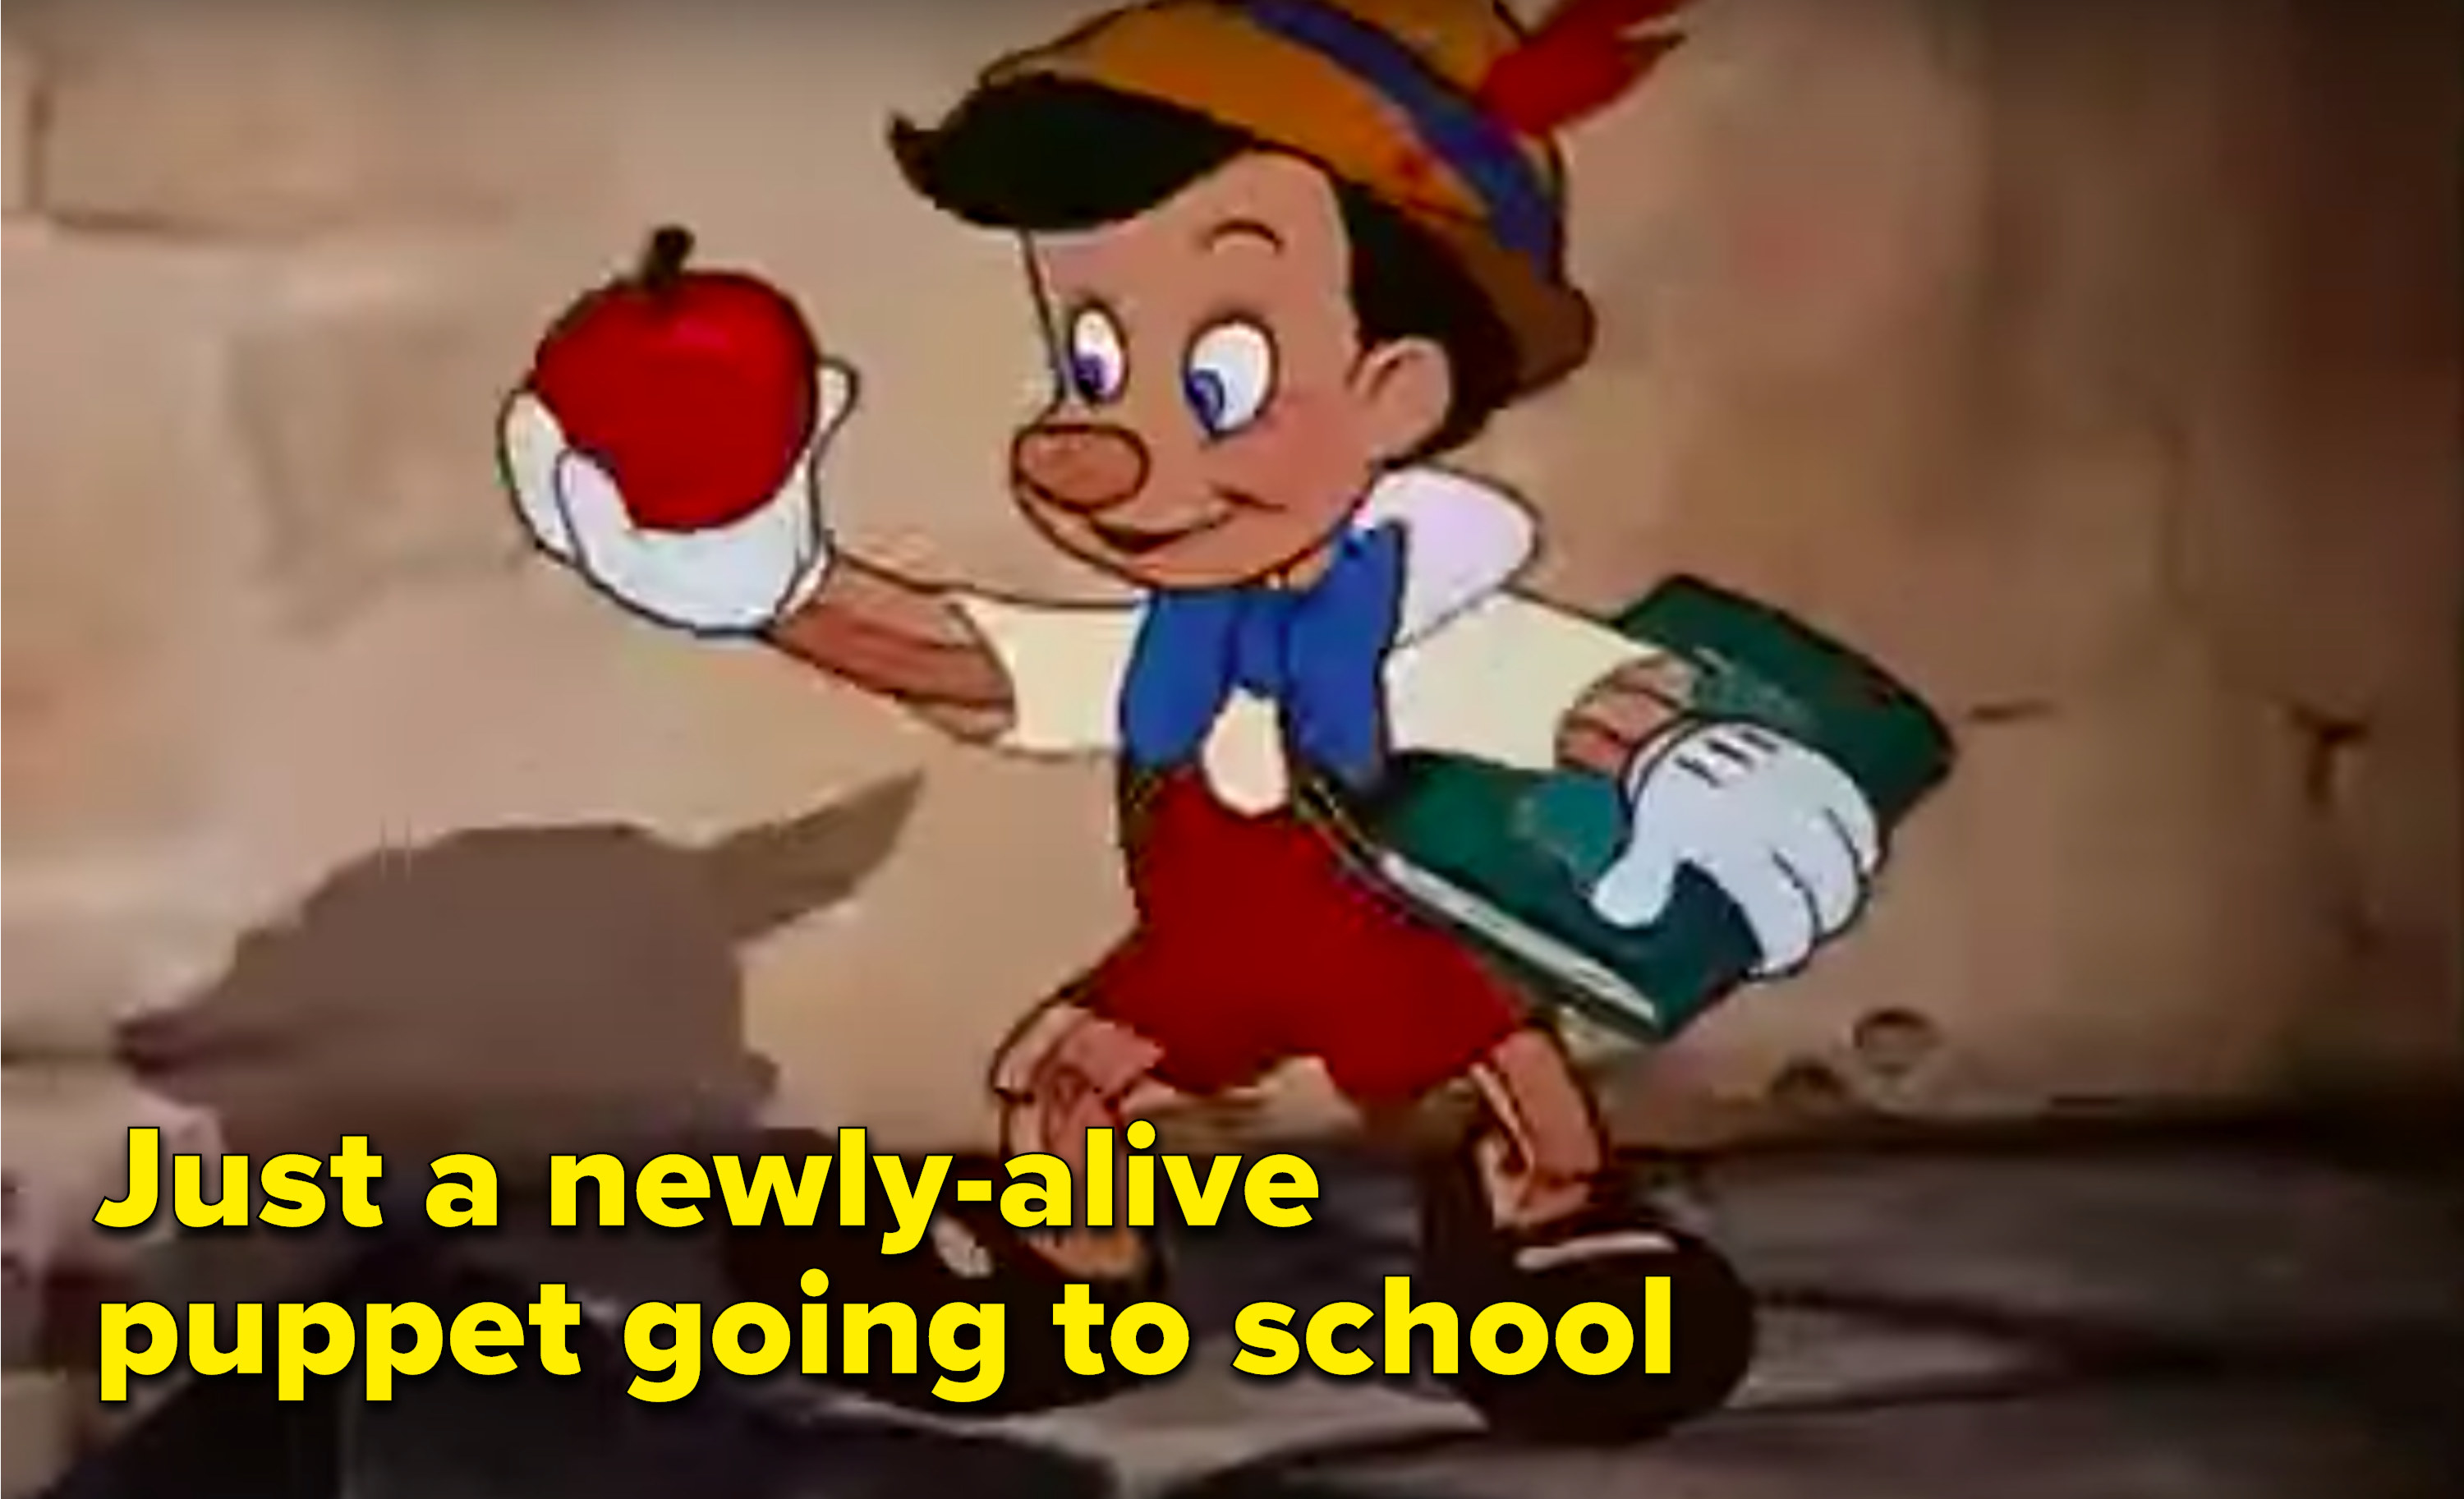 &quot;Just a newly-alive puppet going to school&quot; written next to Pinocchio holding a book and an apple